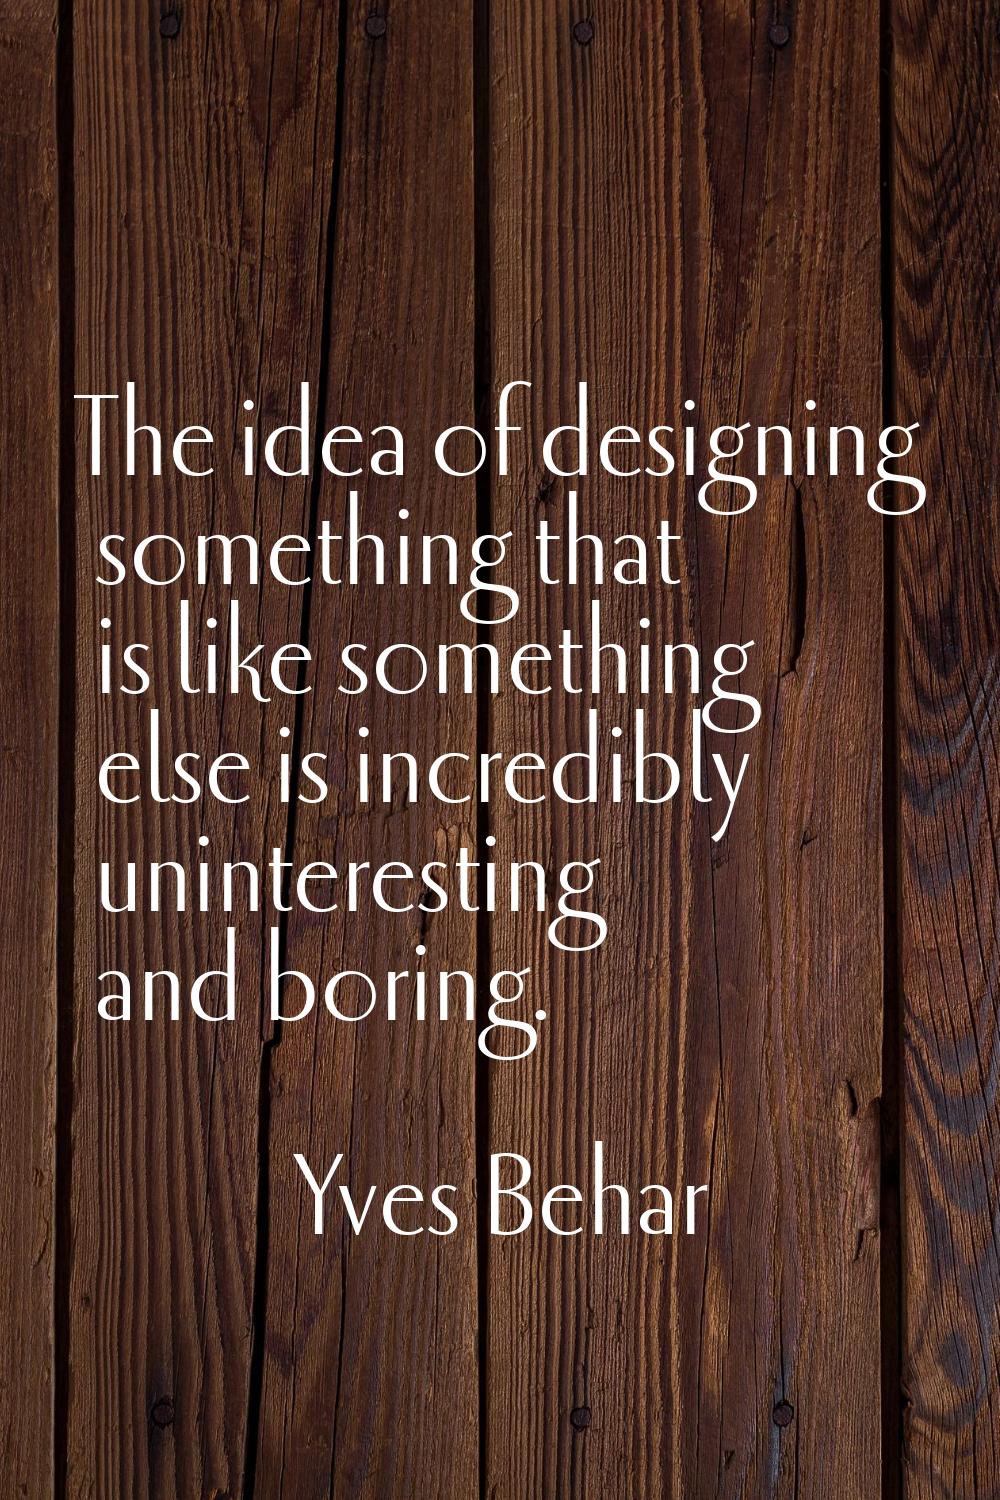 The idea of designing something that is like something else is incredibly uninteresting and boring.